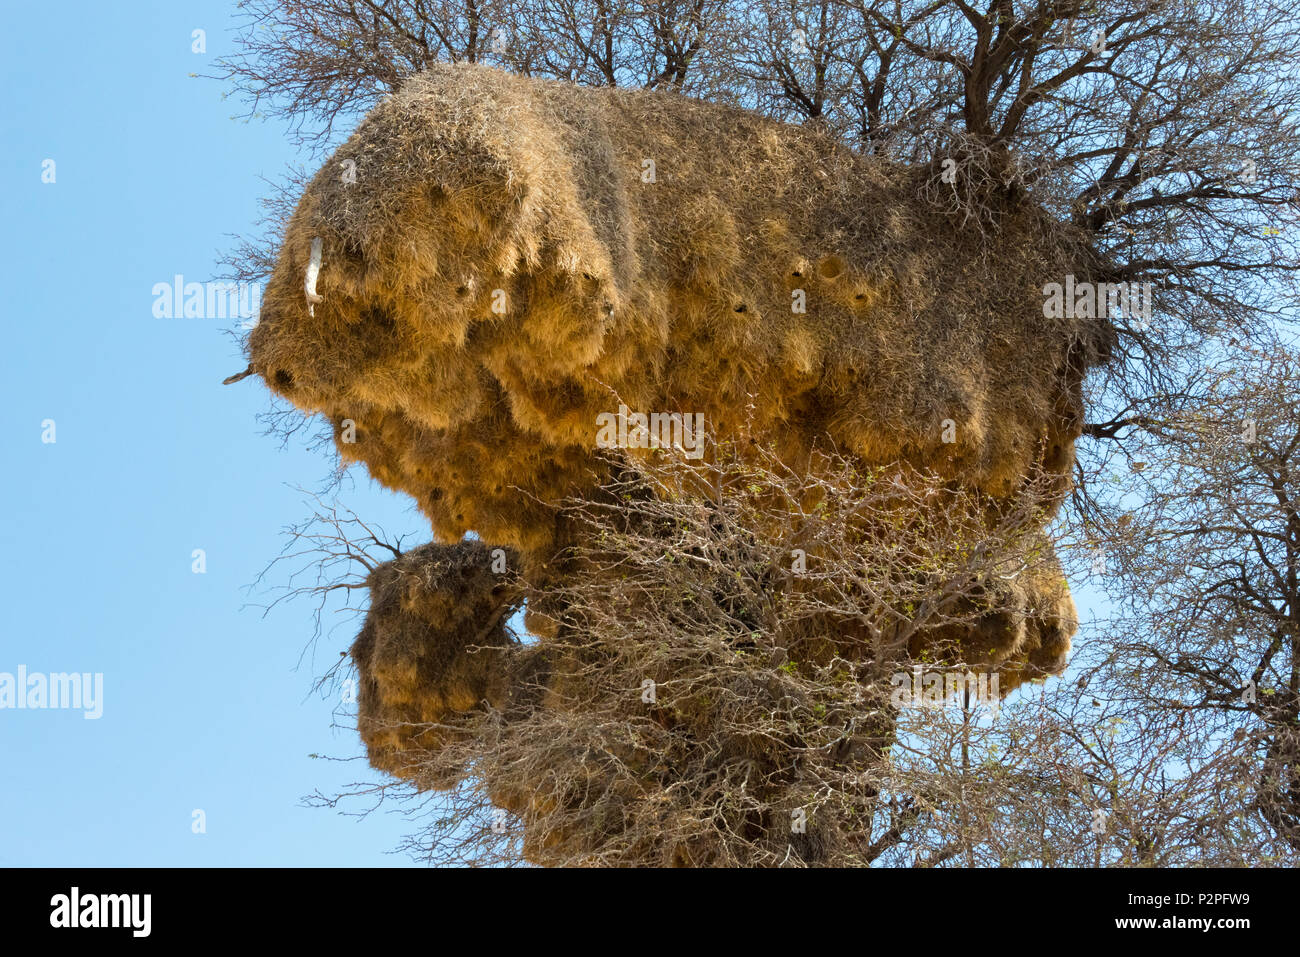 Social weaver colony nests on a tree, Kgalagadi Transfrontier Park, South Africa Stock Photo